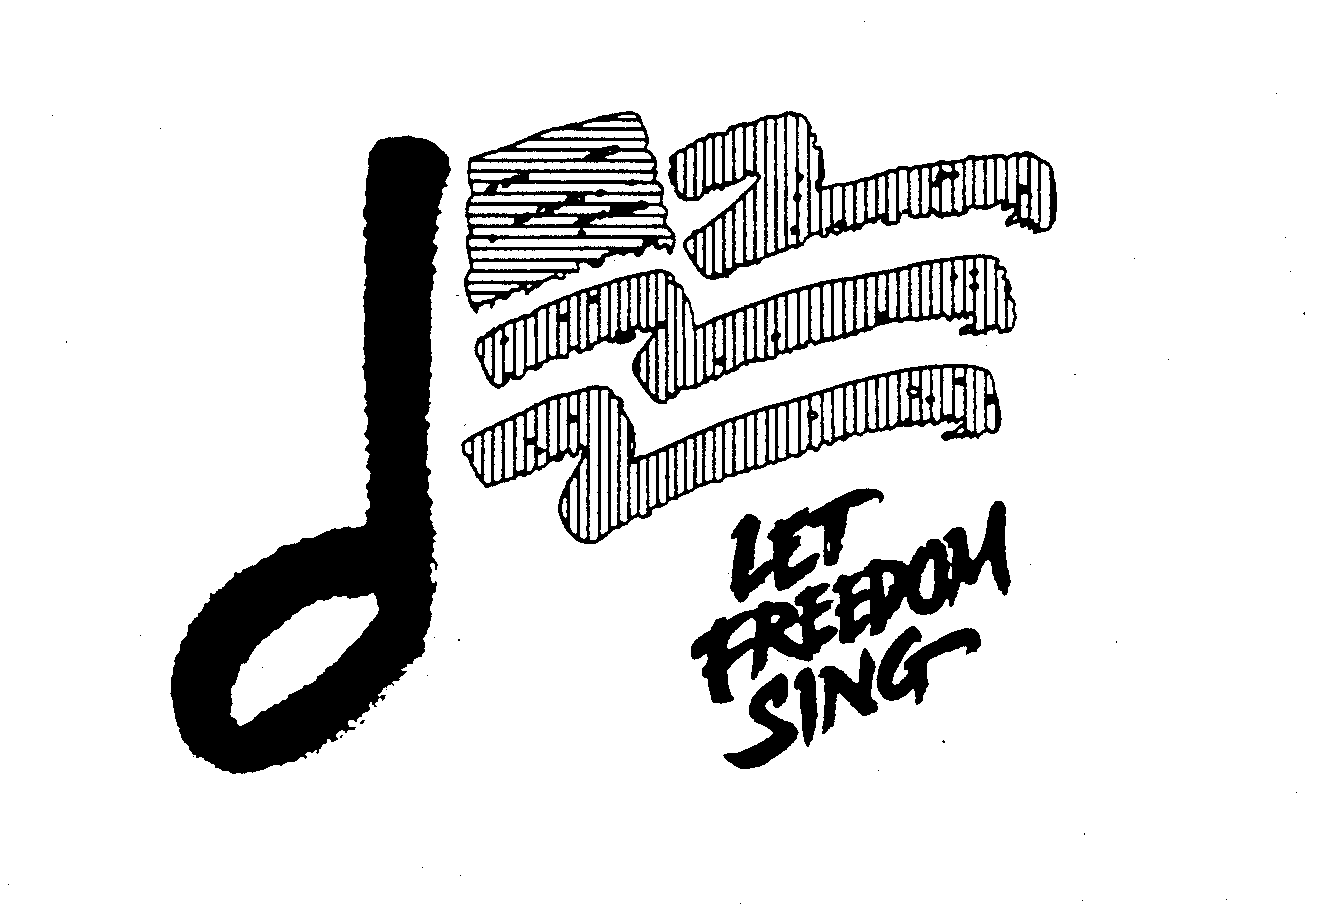  LET FREEDOM SING